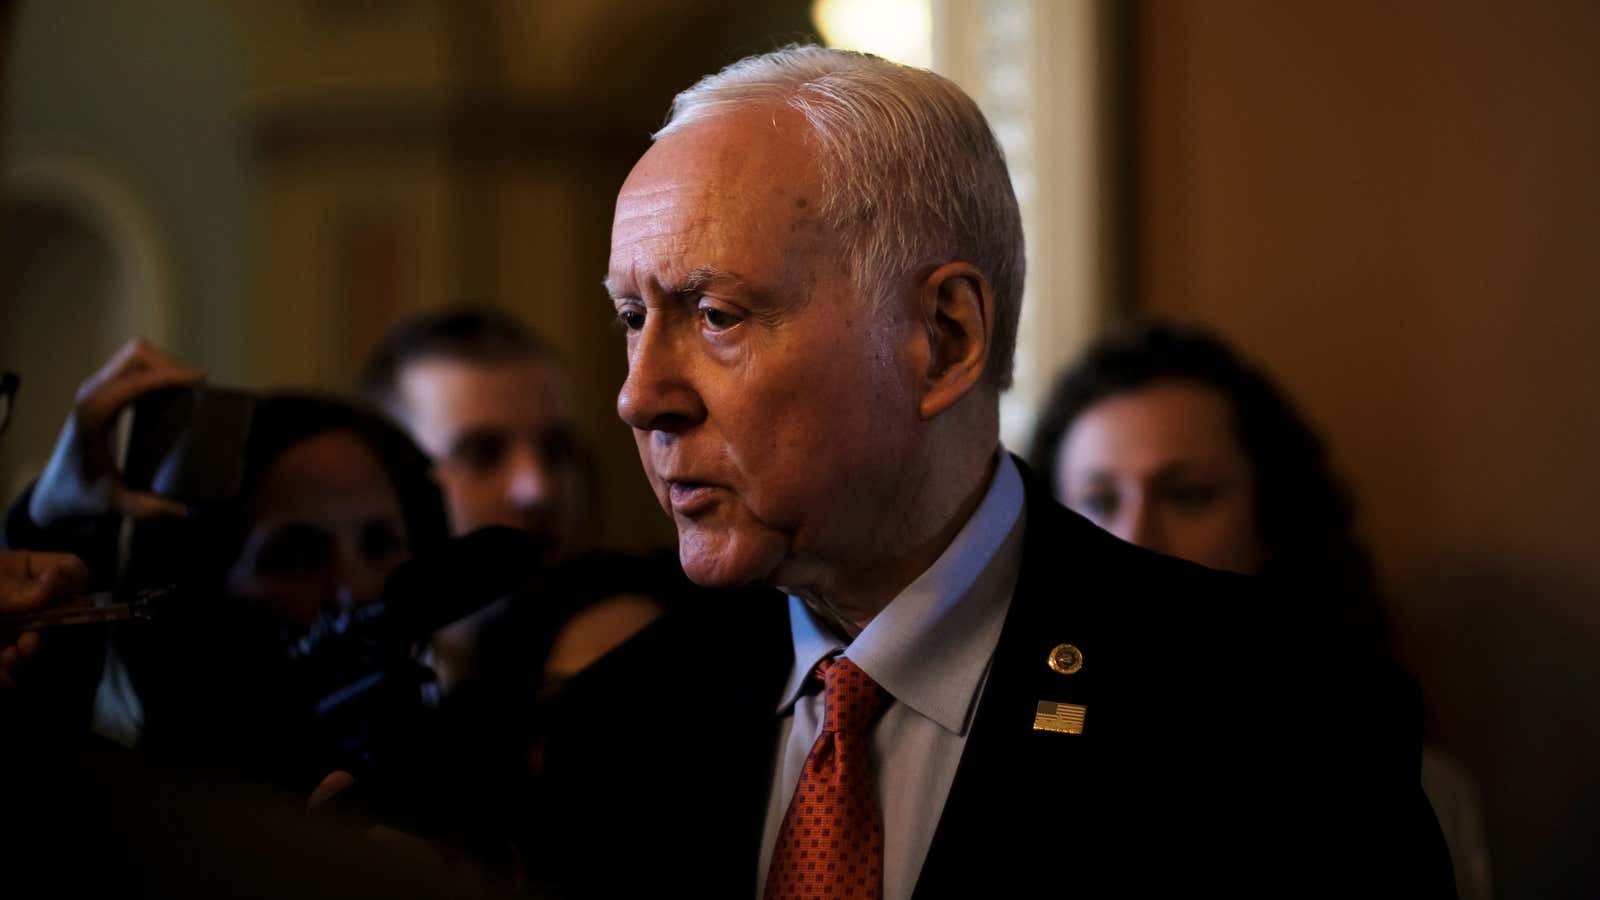 Hatch will be the longest-serving Republican senator when he retires at the end of the year.